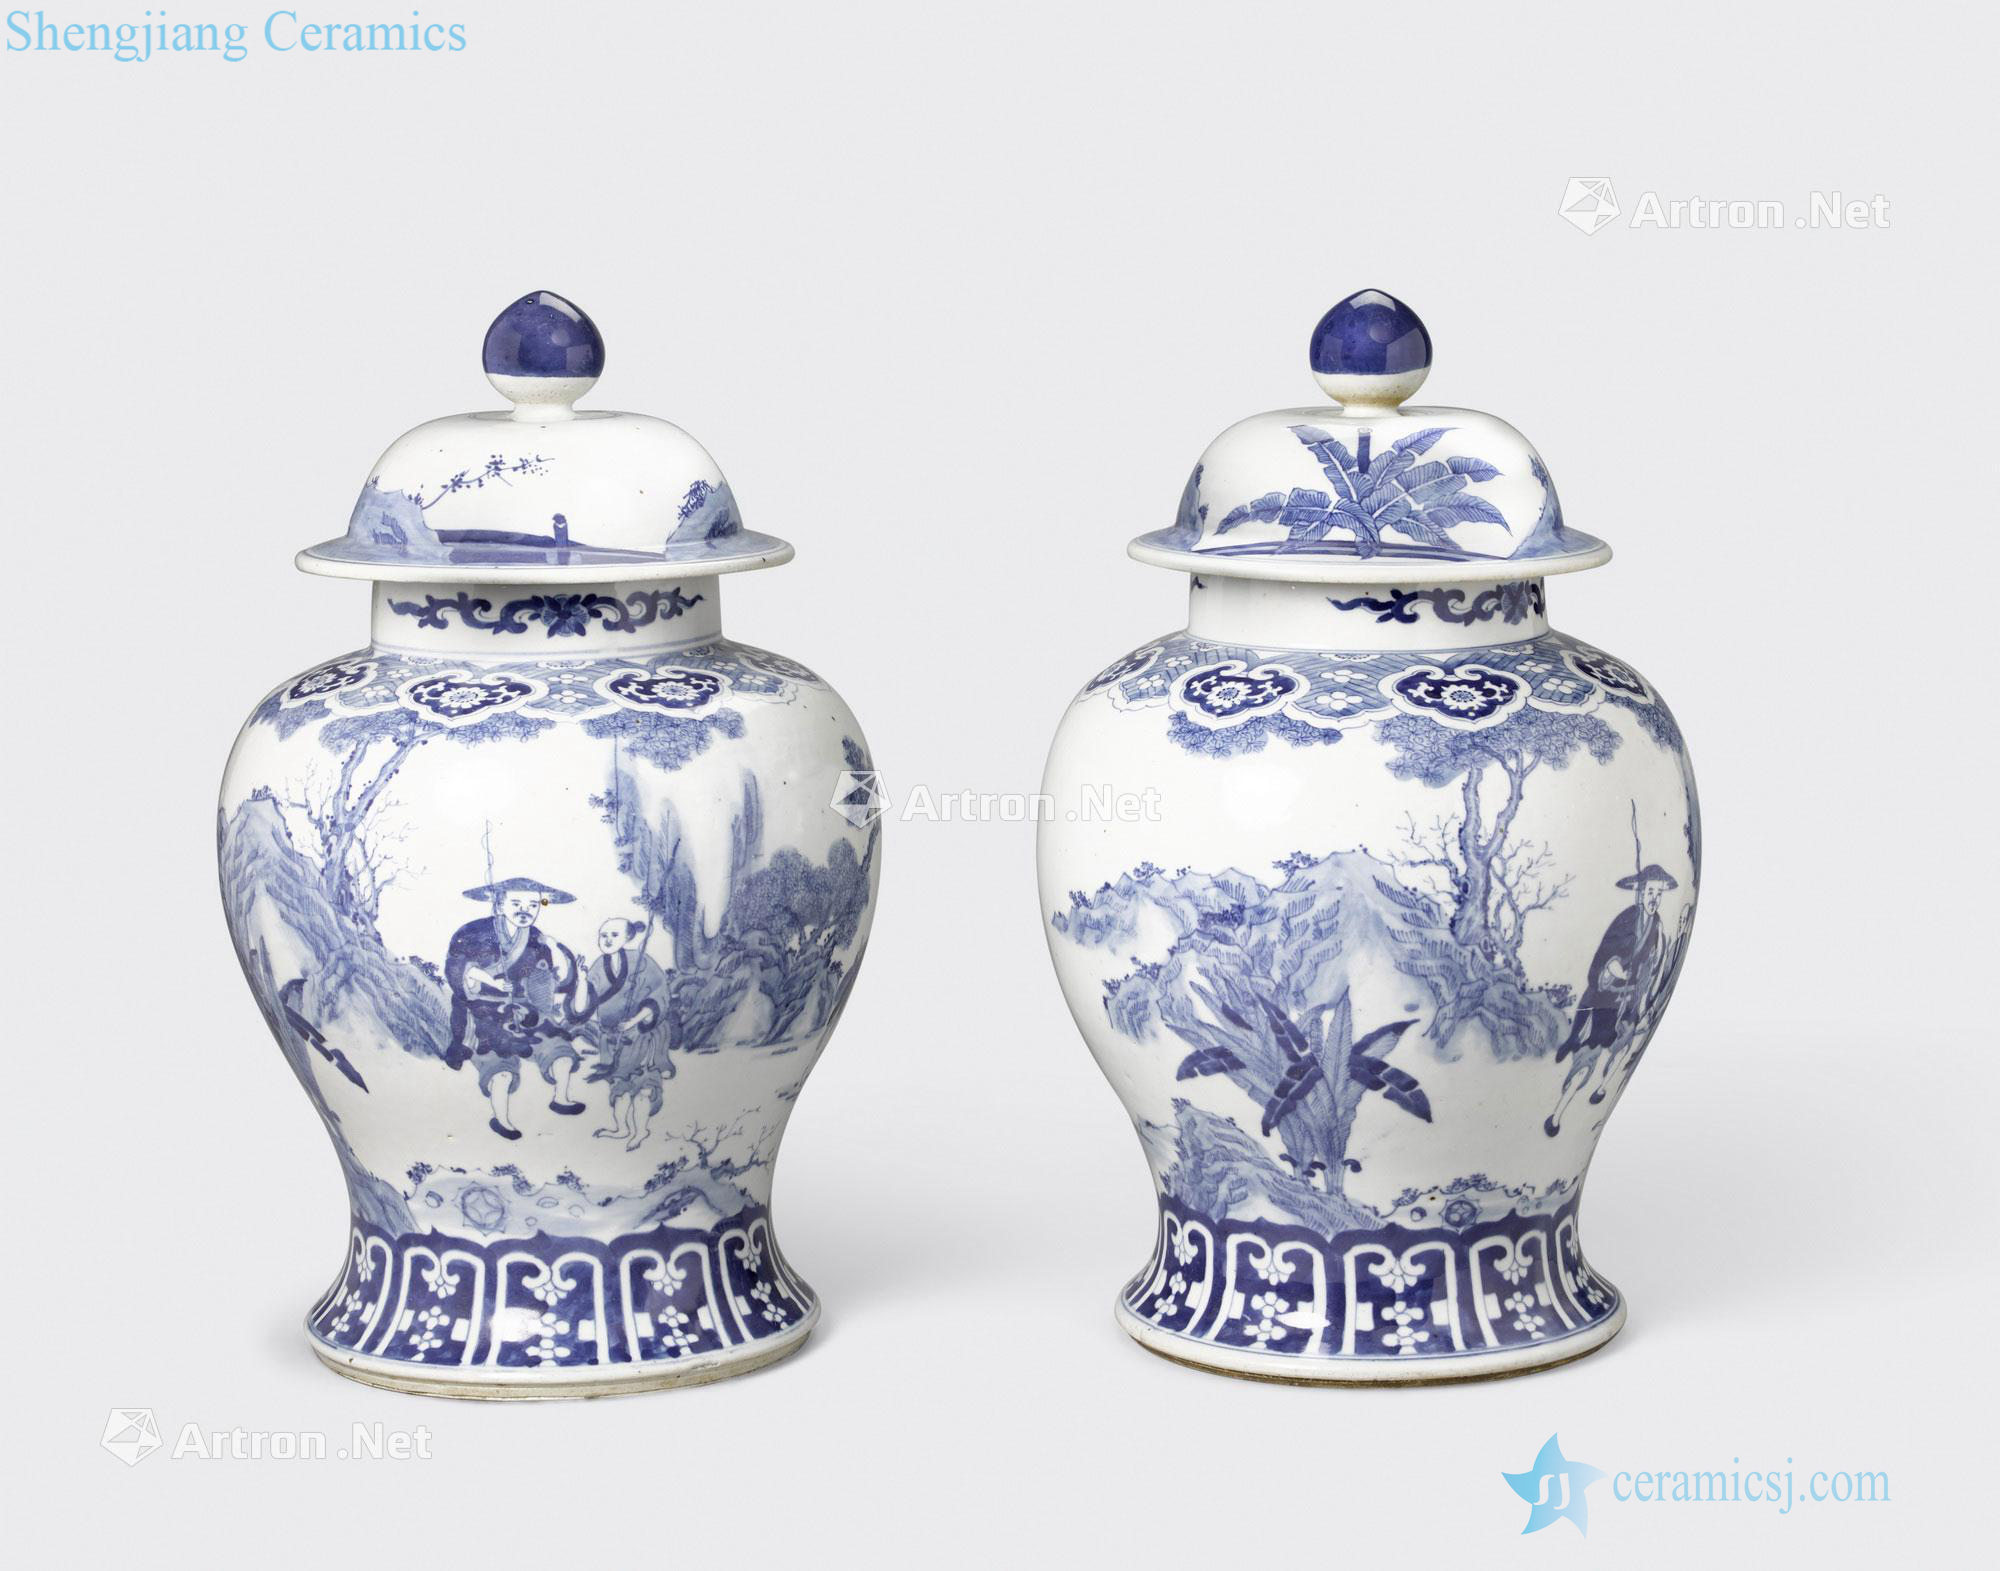 Newest the Qing/Republic period A PAIR OF BLUE AND WHITE COVERED BALUSTER JARS WITH DESIGNS OF FISHERMEN